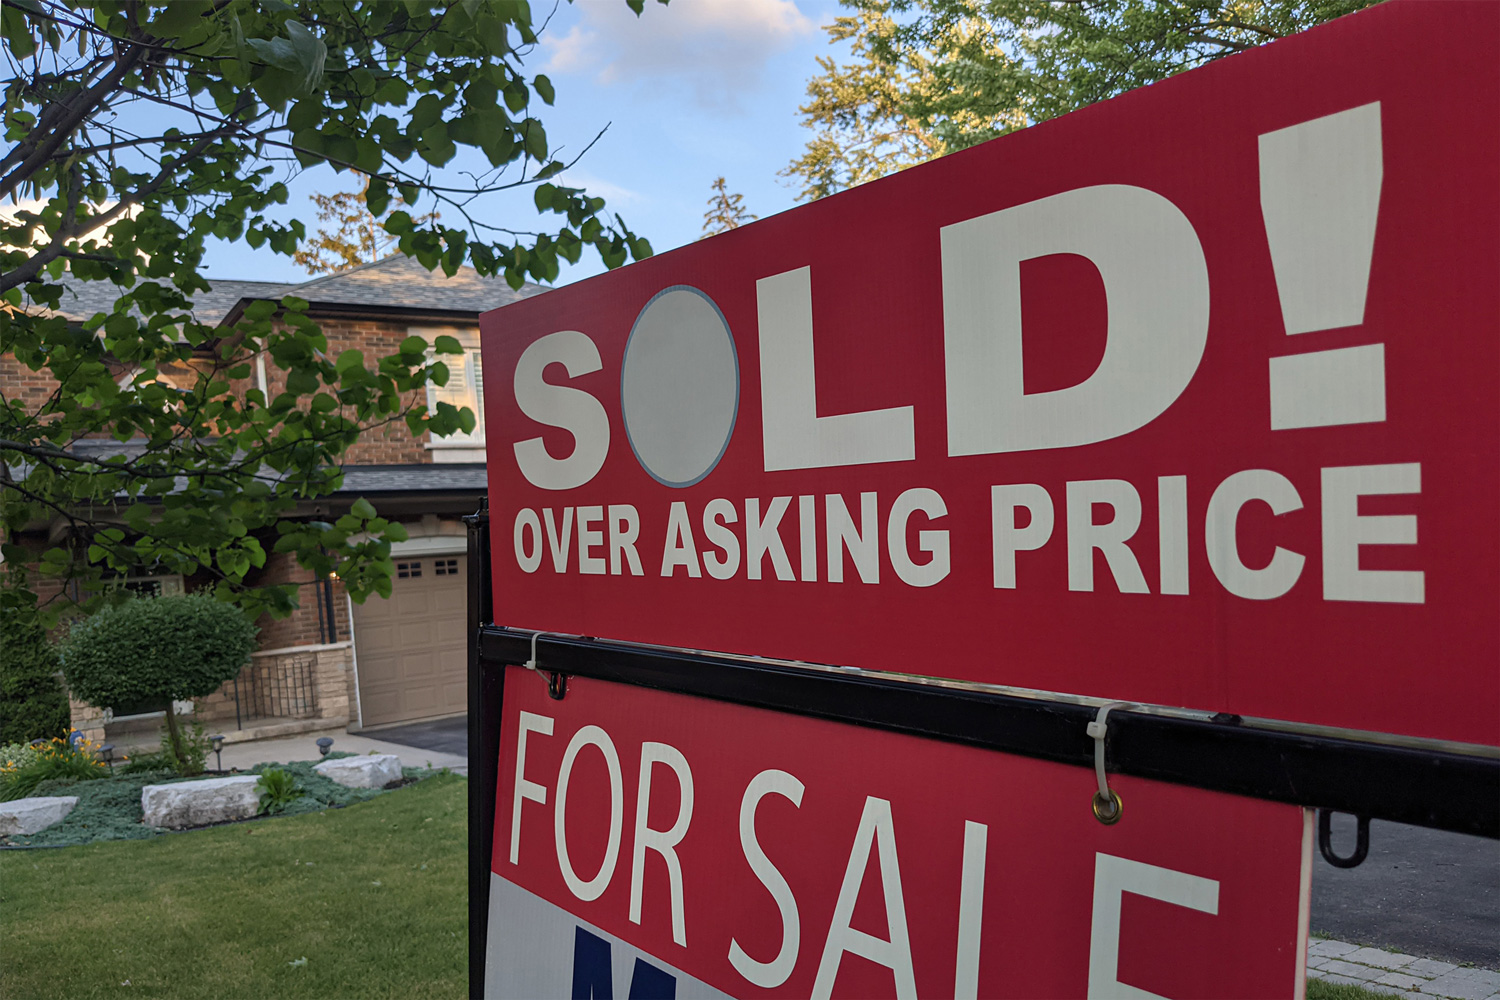 New sign sold over asking price for sale in front of detached house in residential area. Real estate bubble, crash, hot housing market, overpriced property, buyer activity concept.